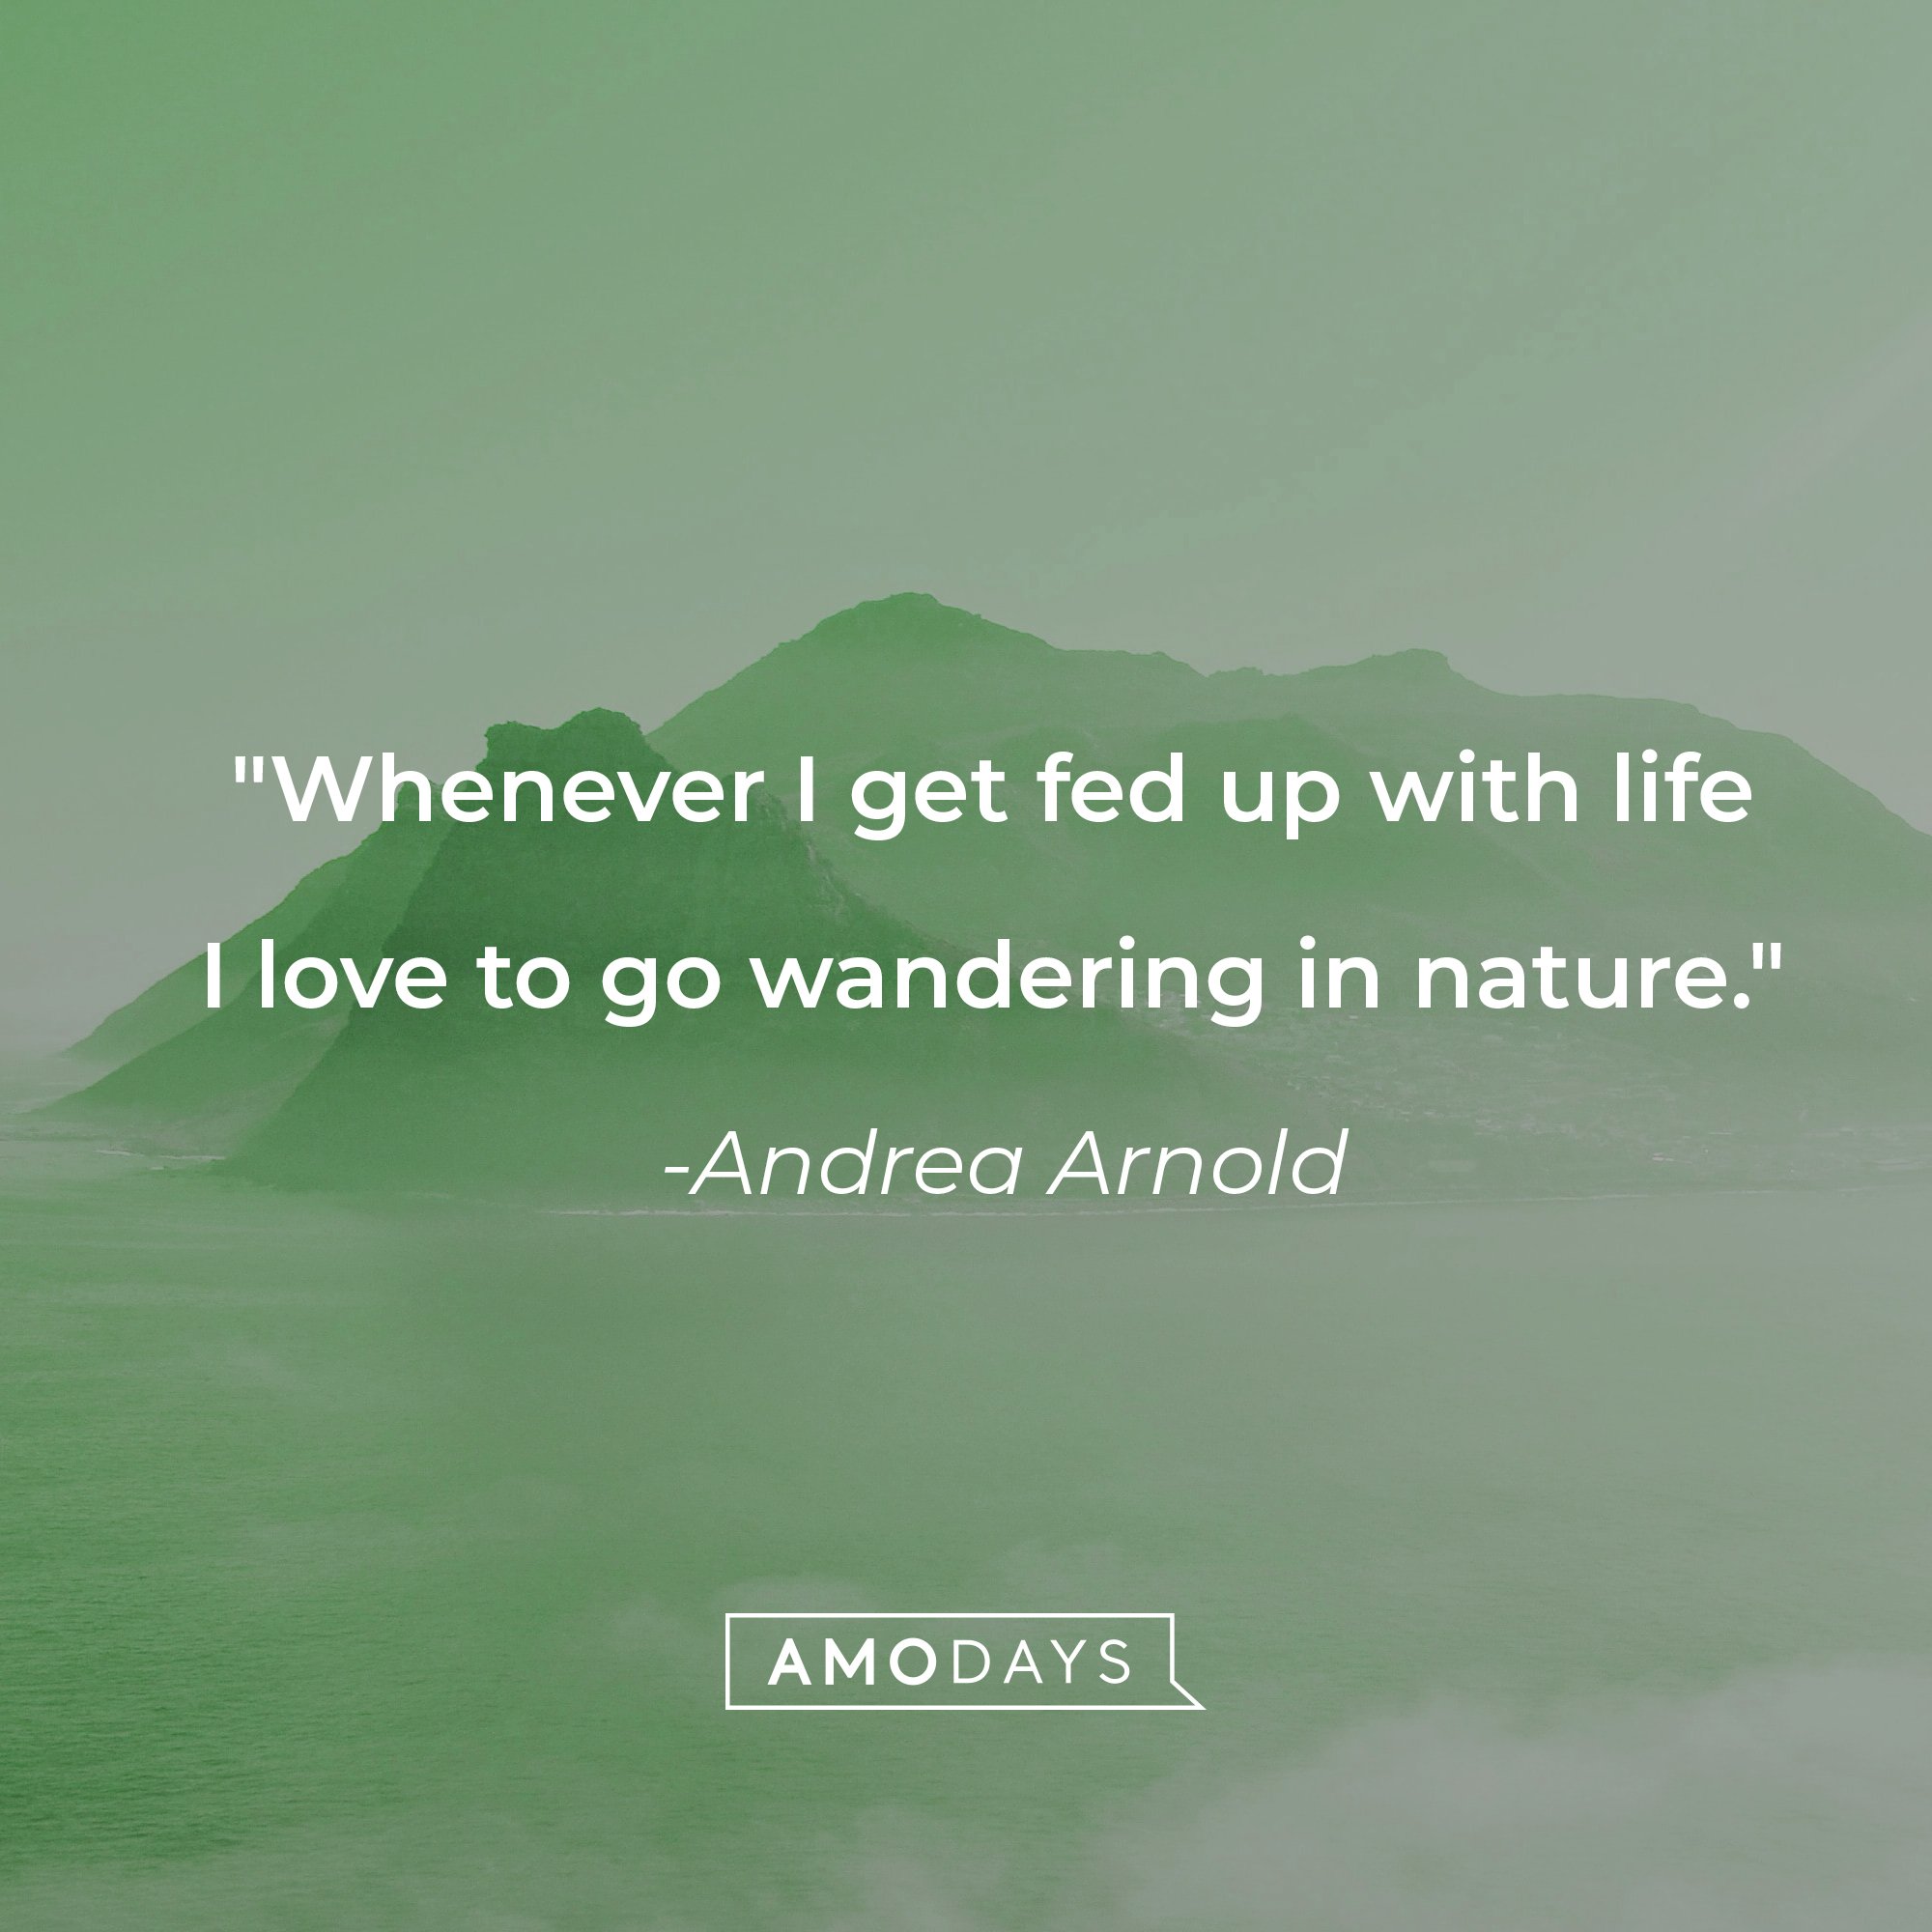 Andrea Arnold's quote: "Whenever I get fed up with life I love to go wandering in nature." | Source: AmoDays